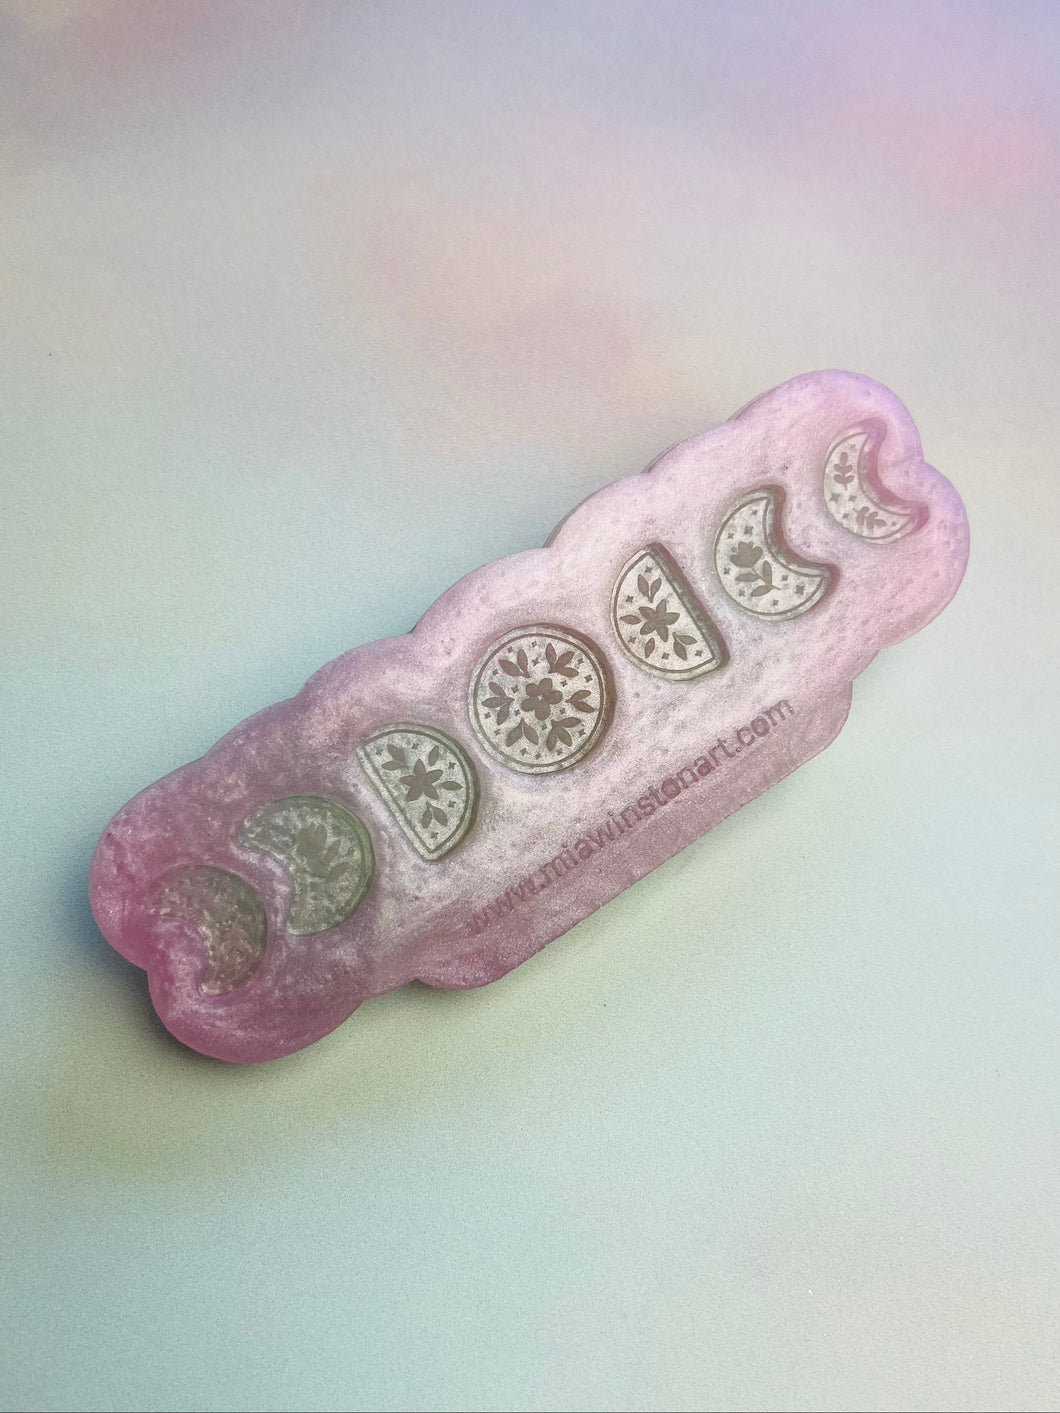 Floral moon phase silicone mould